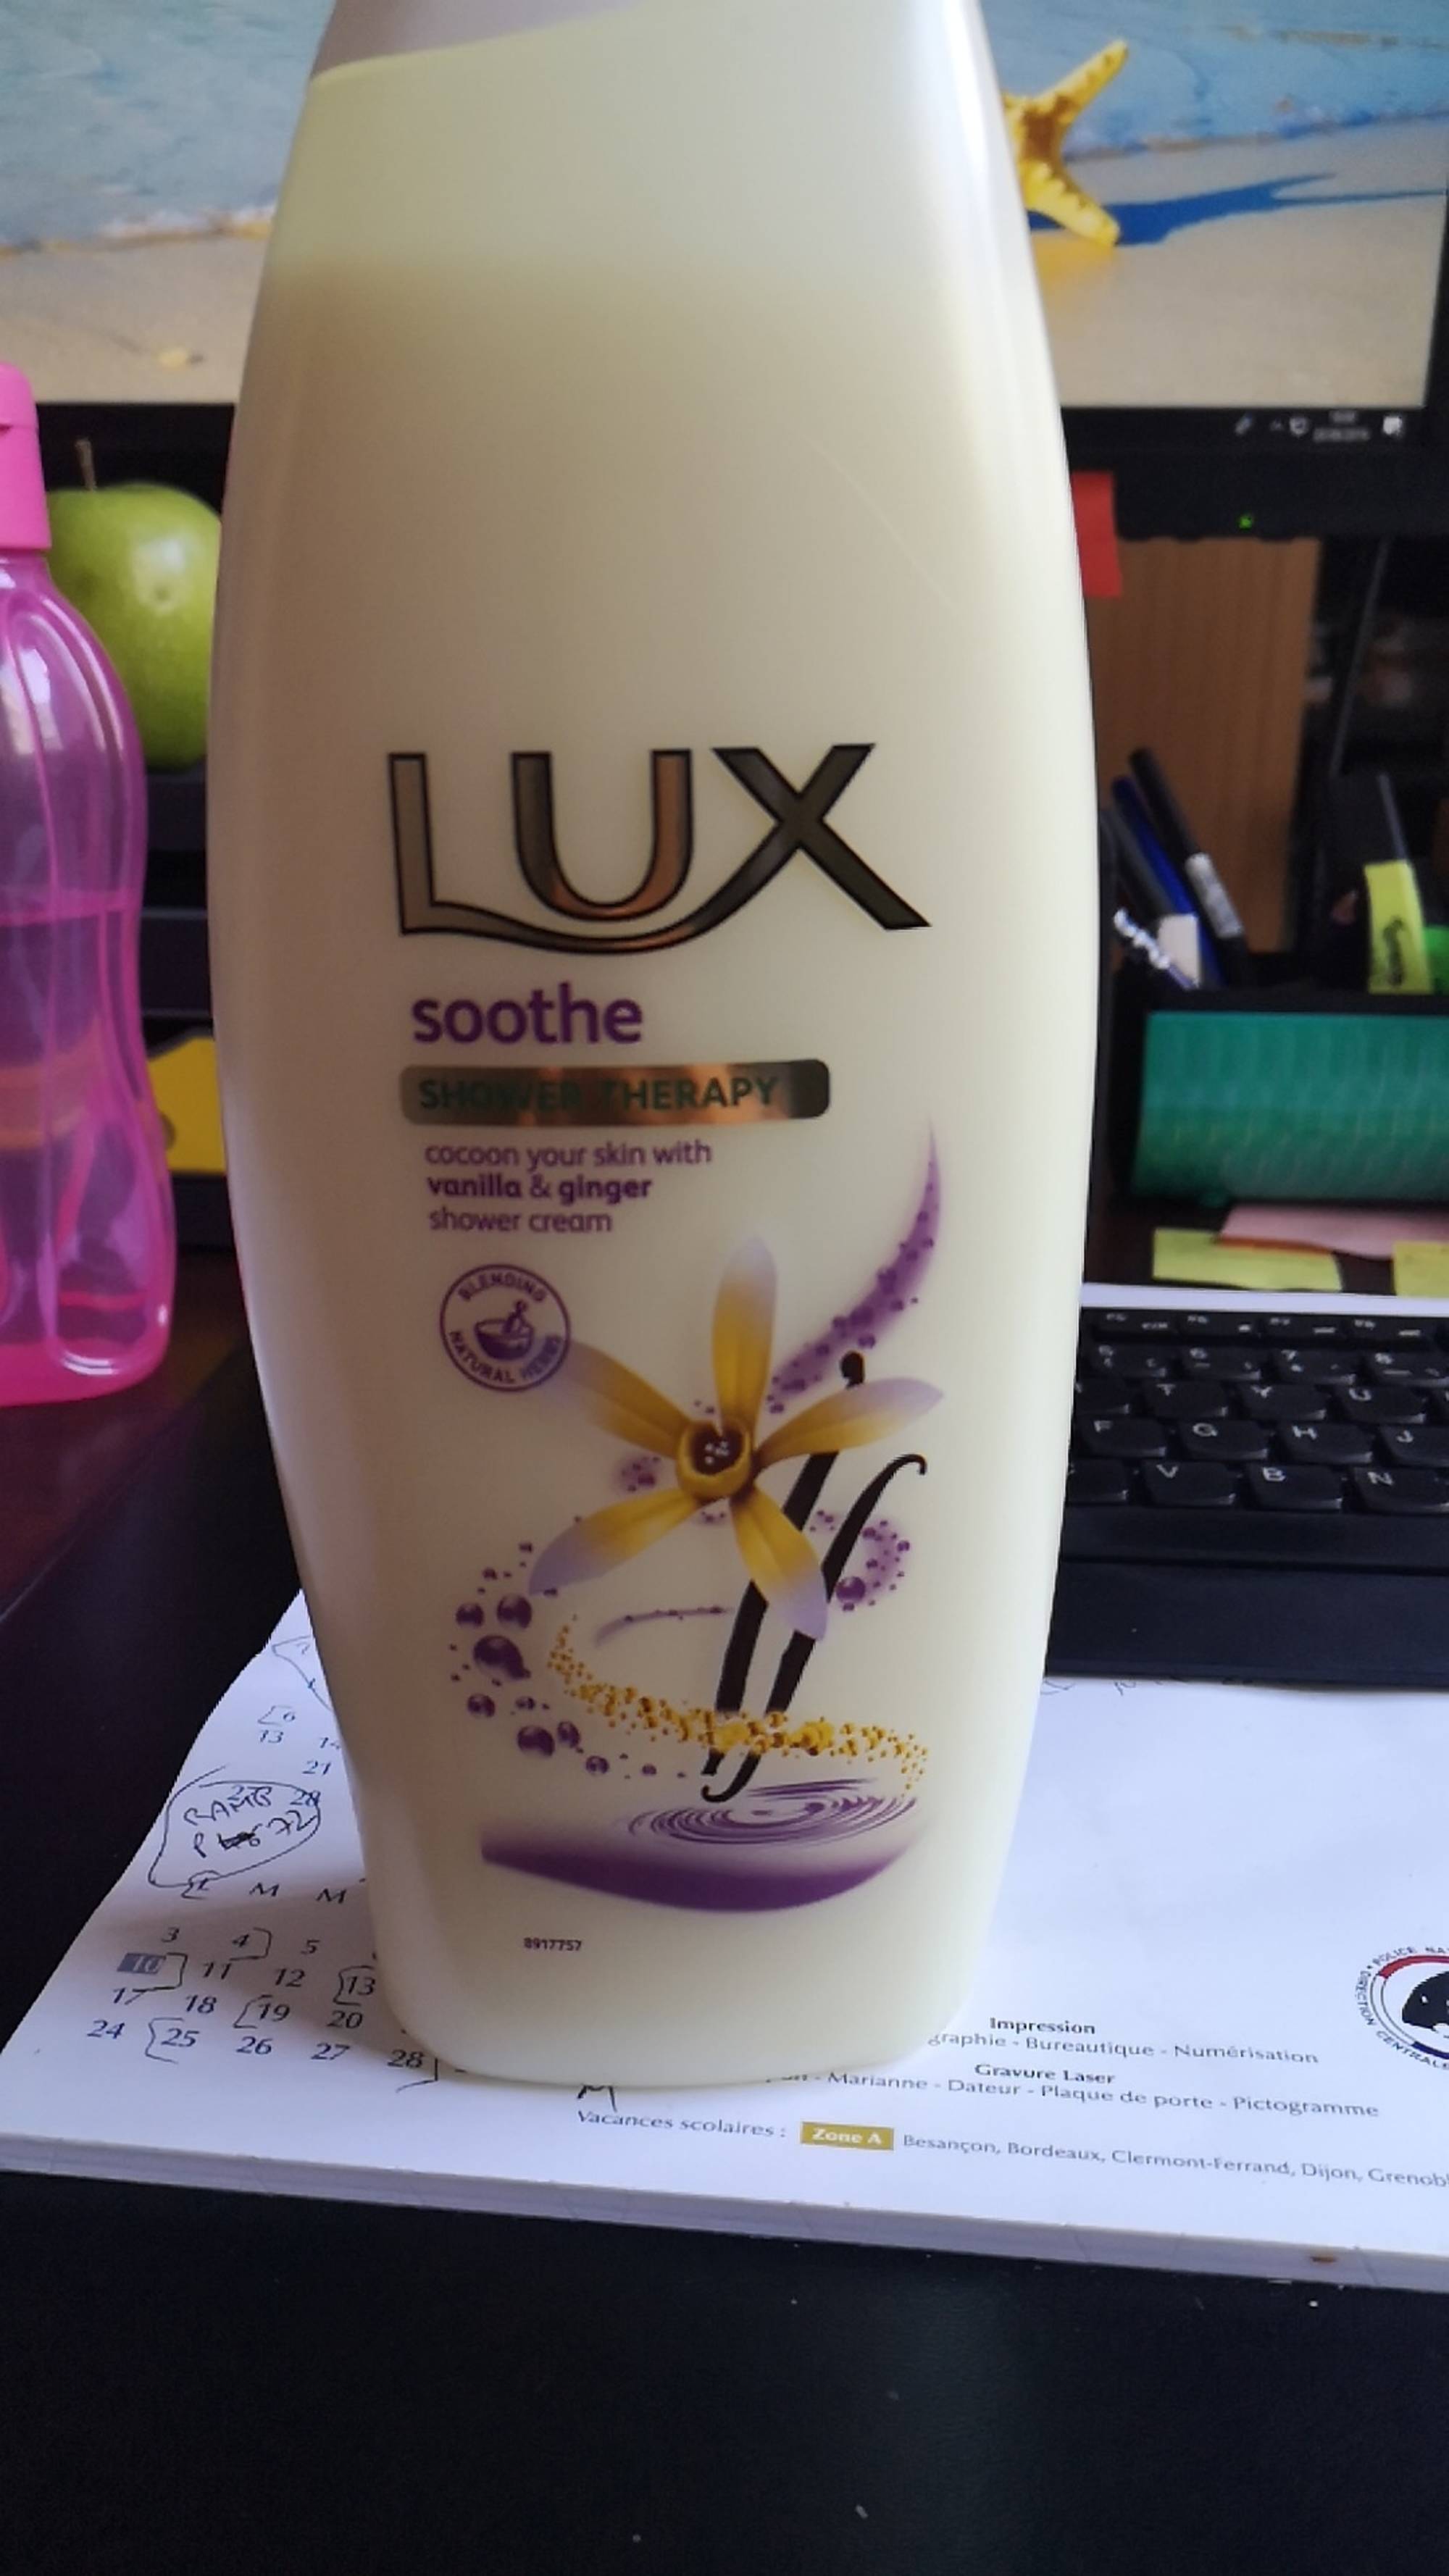 LUX - Soothe - Shower therapy